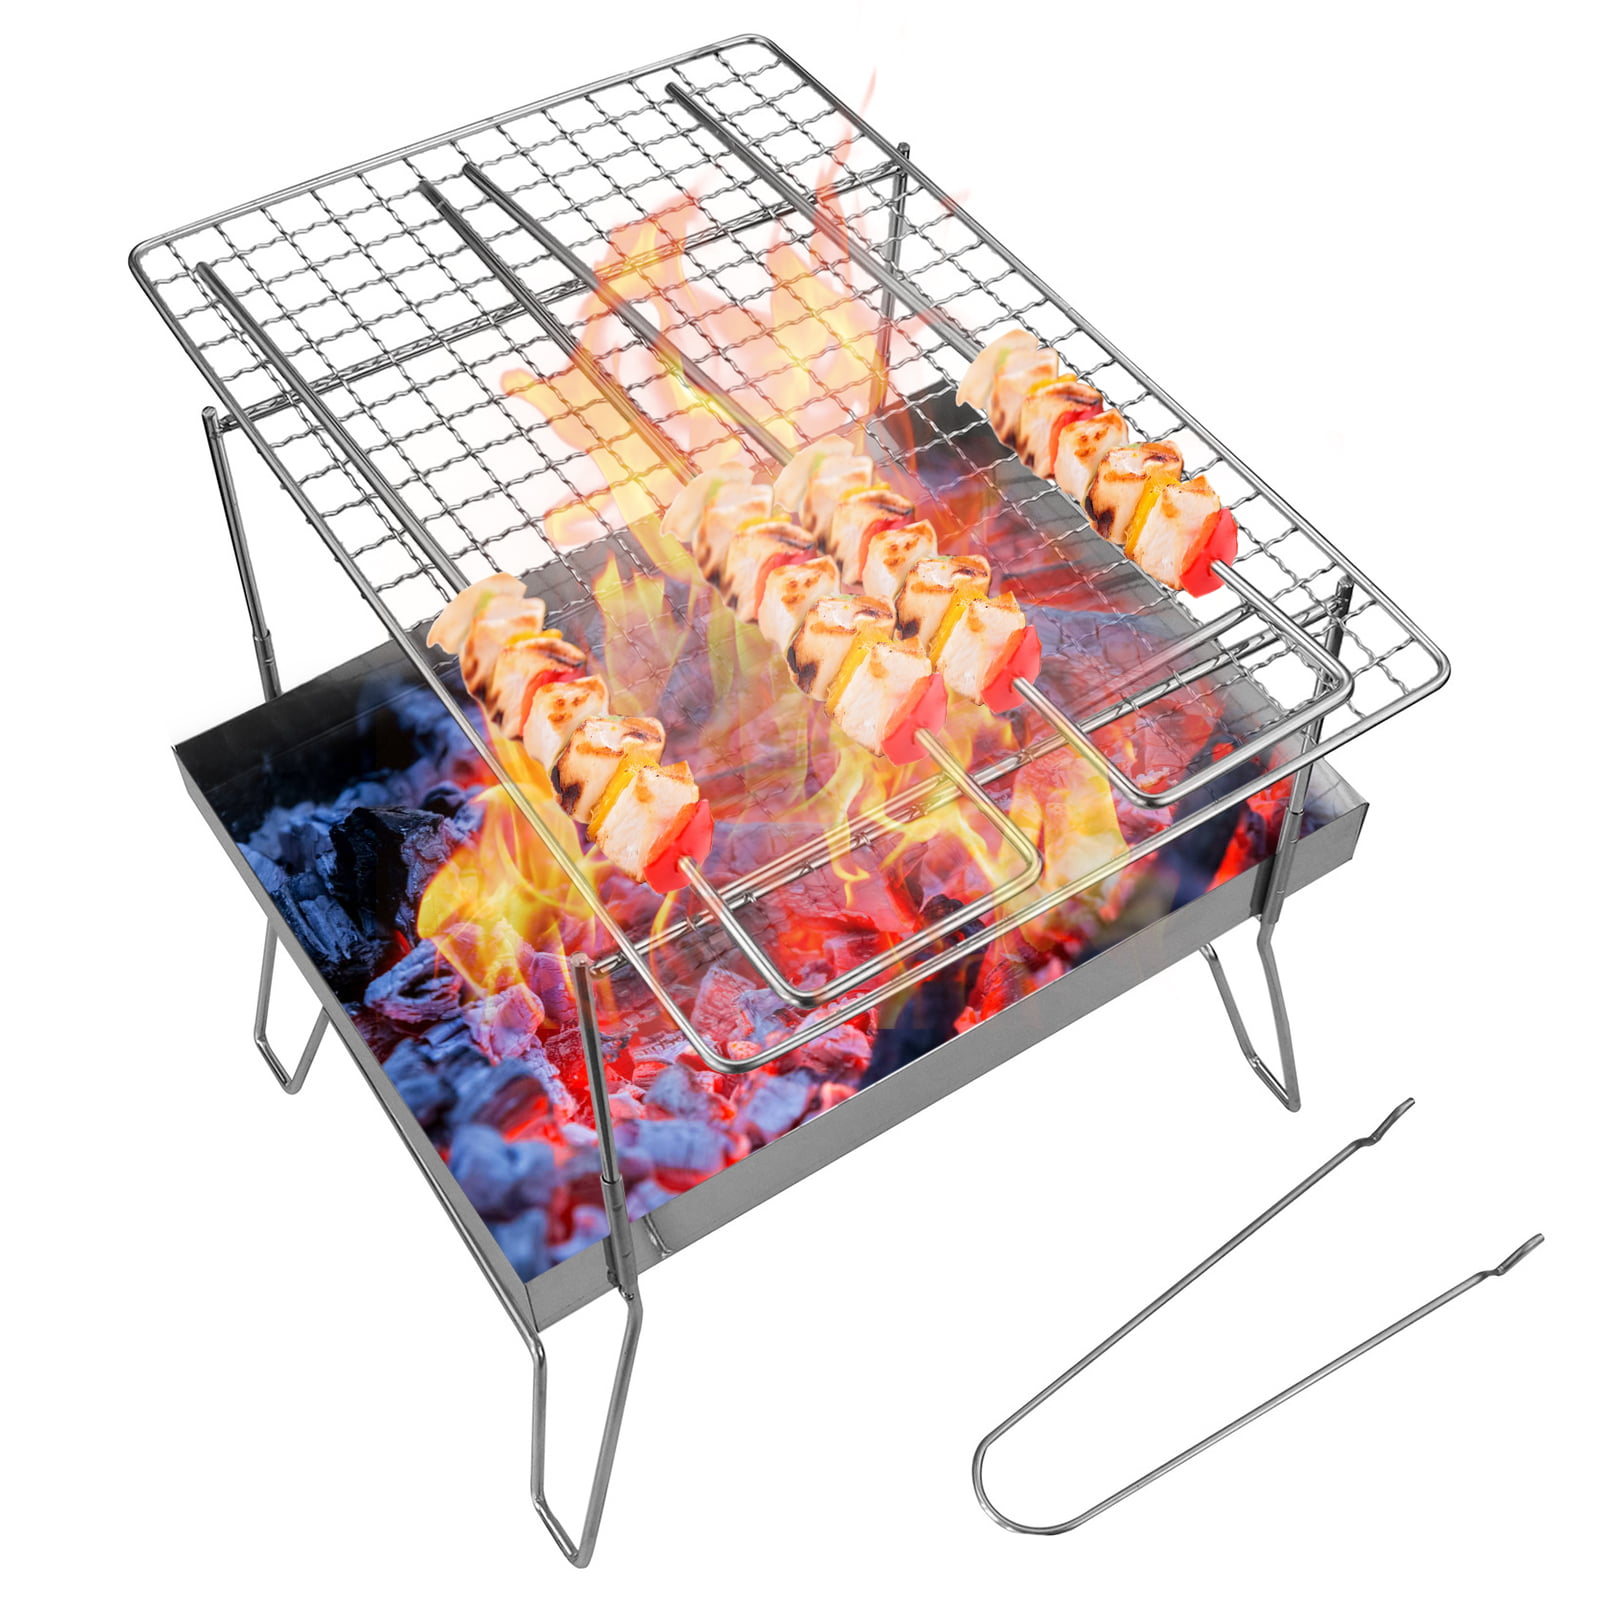 Portable Barbecue Grill Basket Grate Foldable Stainless Steel Camping Barbecue G 